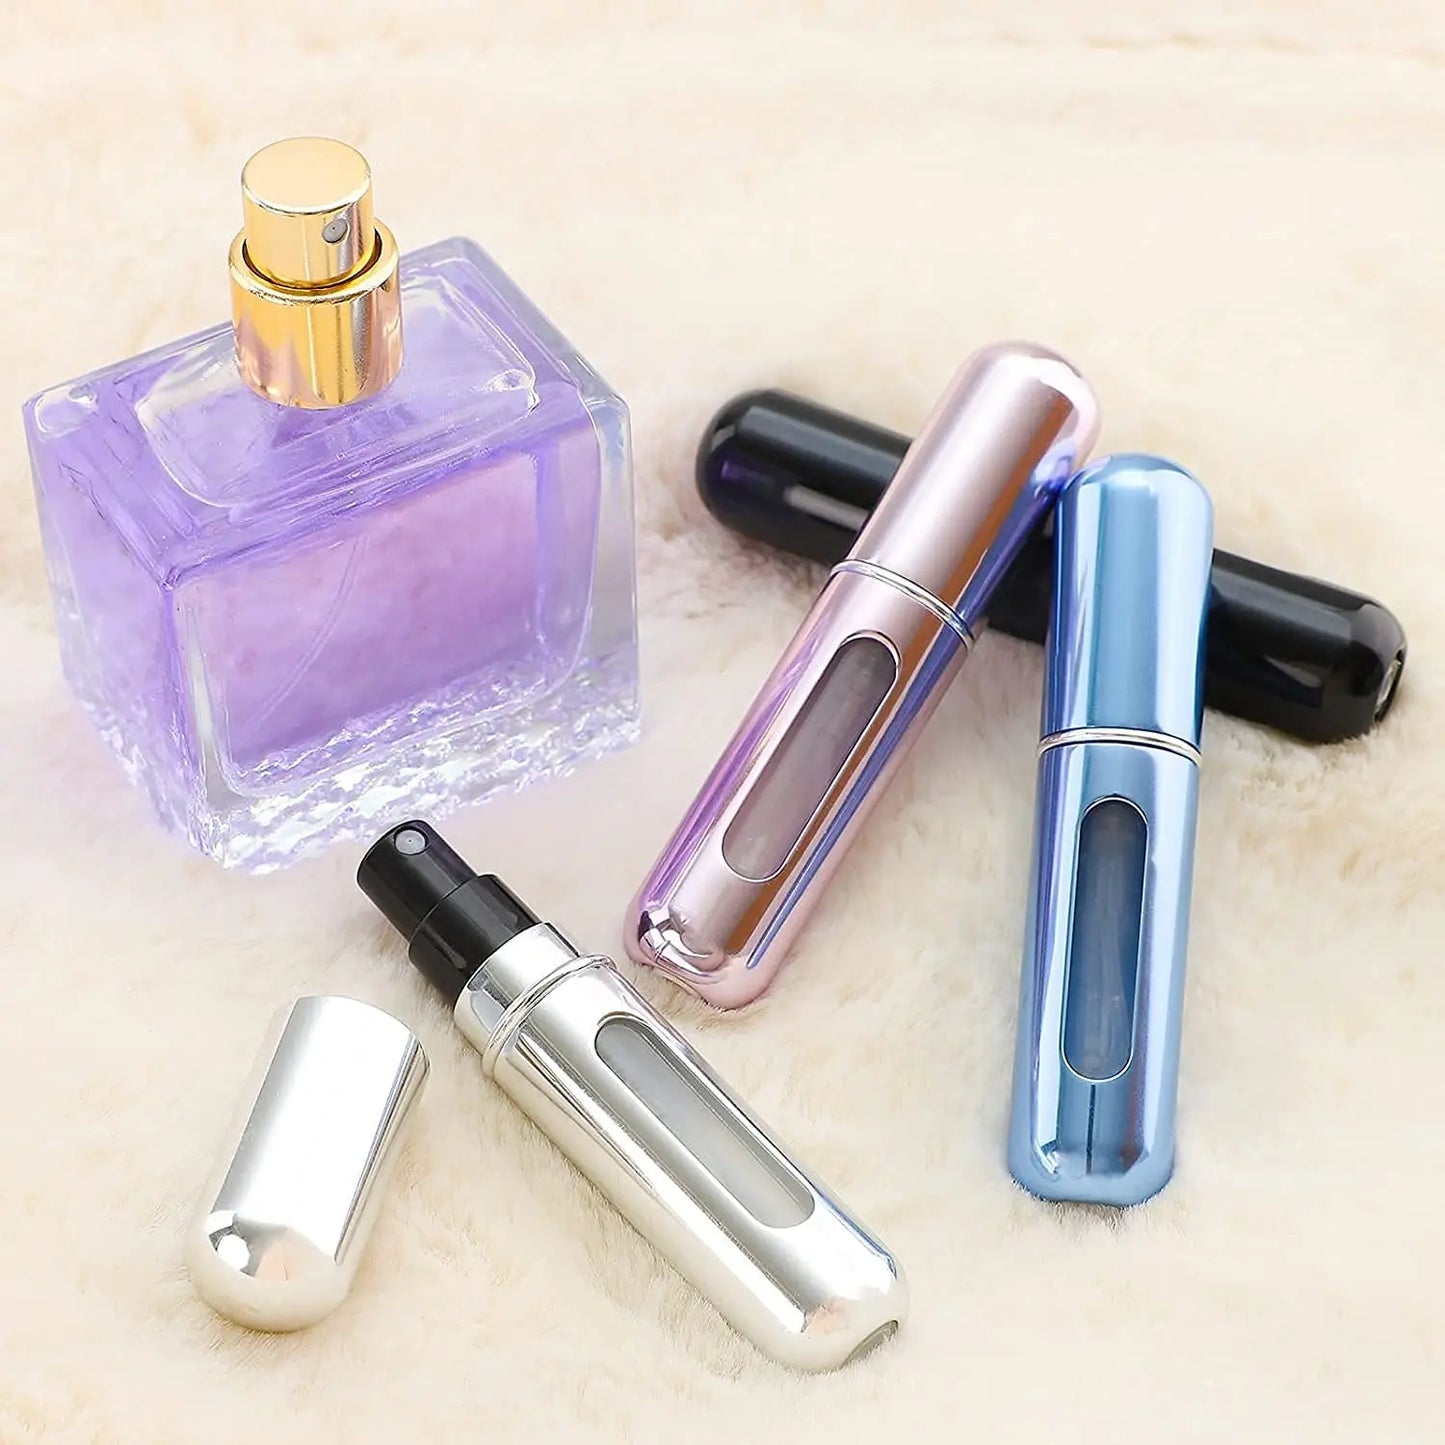 Stay Fresh Anywhere with the Portable Perfume Atomizer – Your Travel-Ready Fragrance Solution!